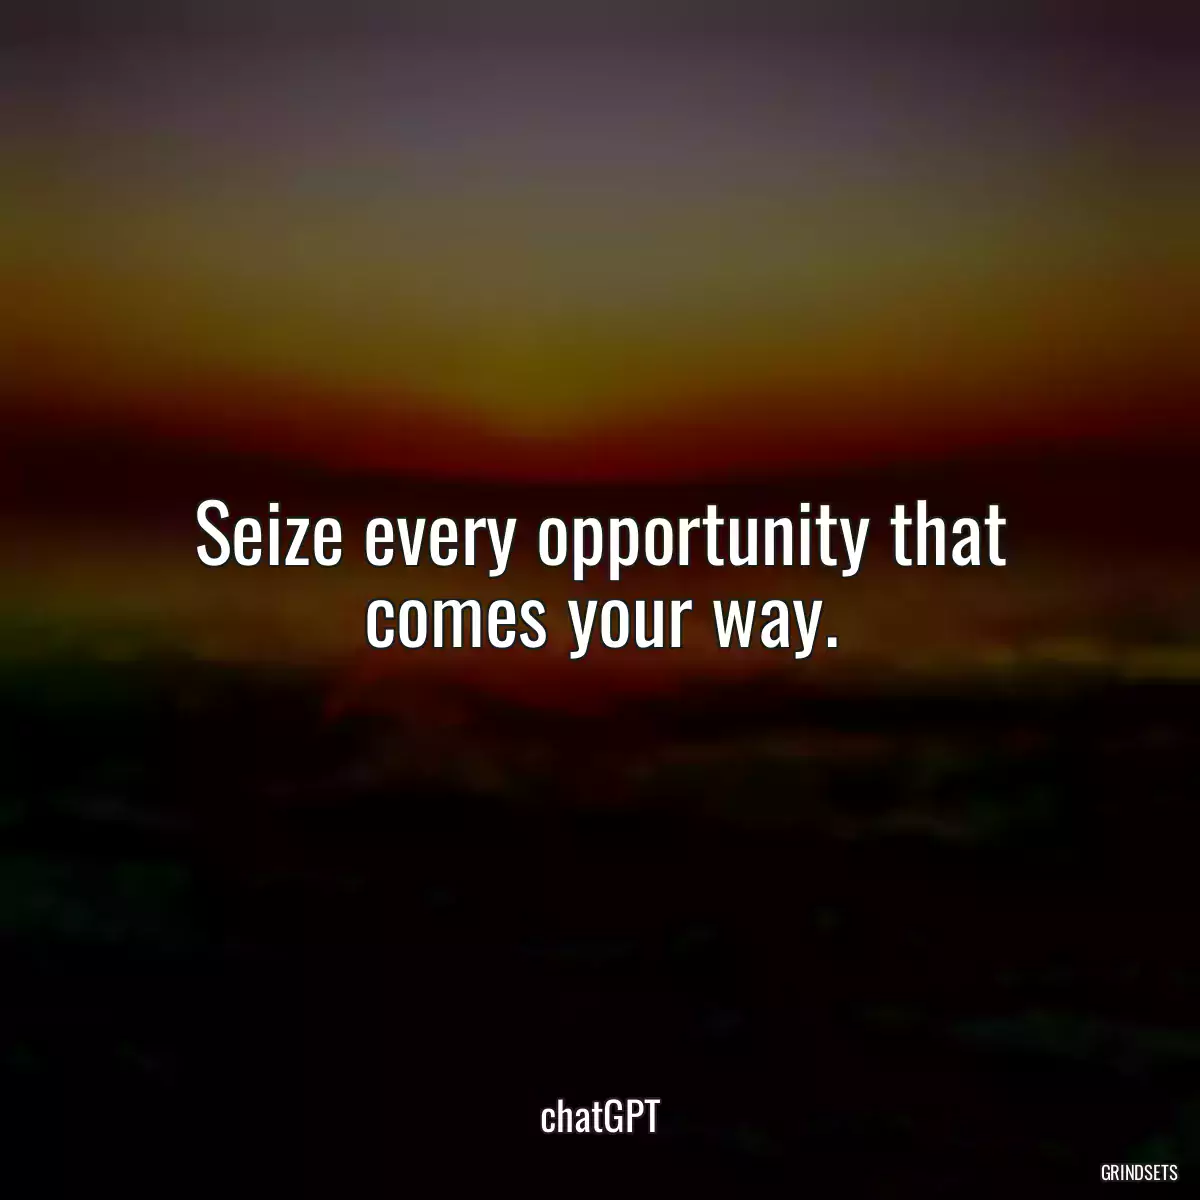 Seize every opportunity that comes your way.